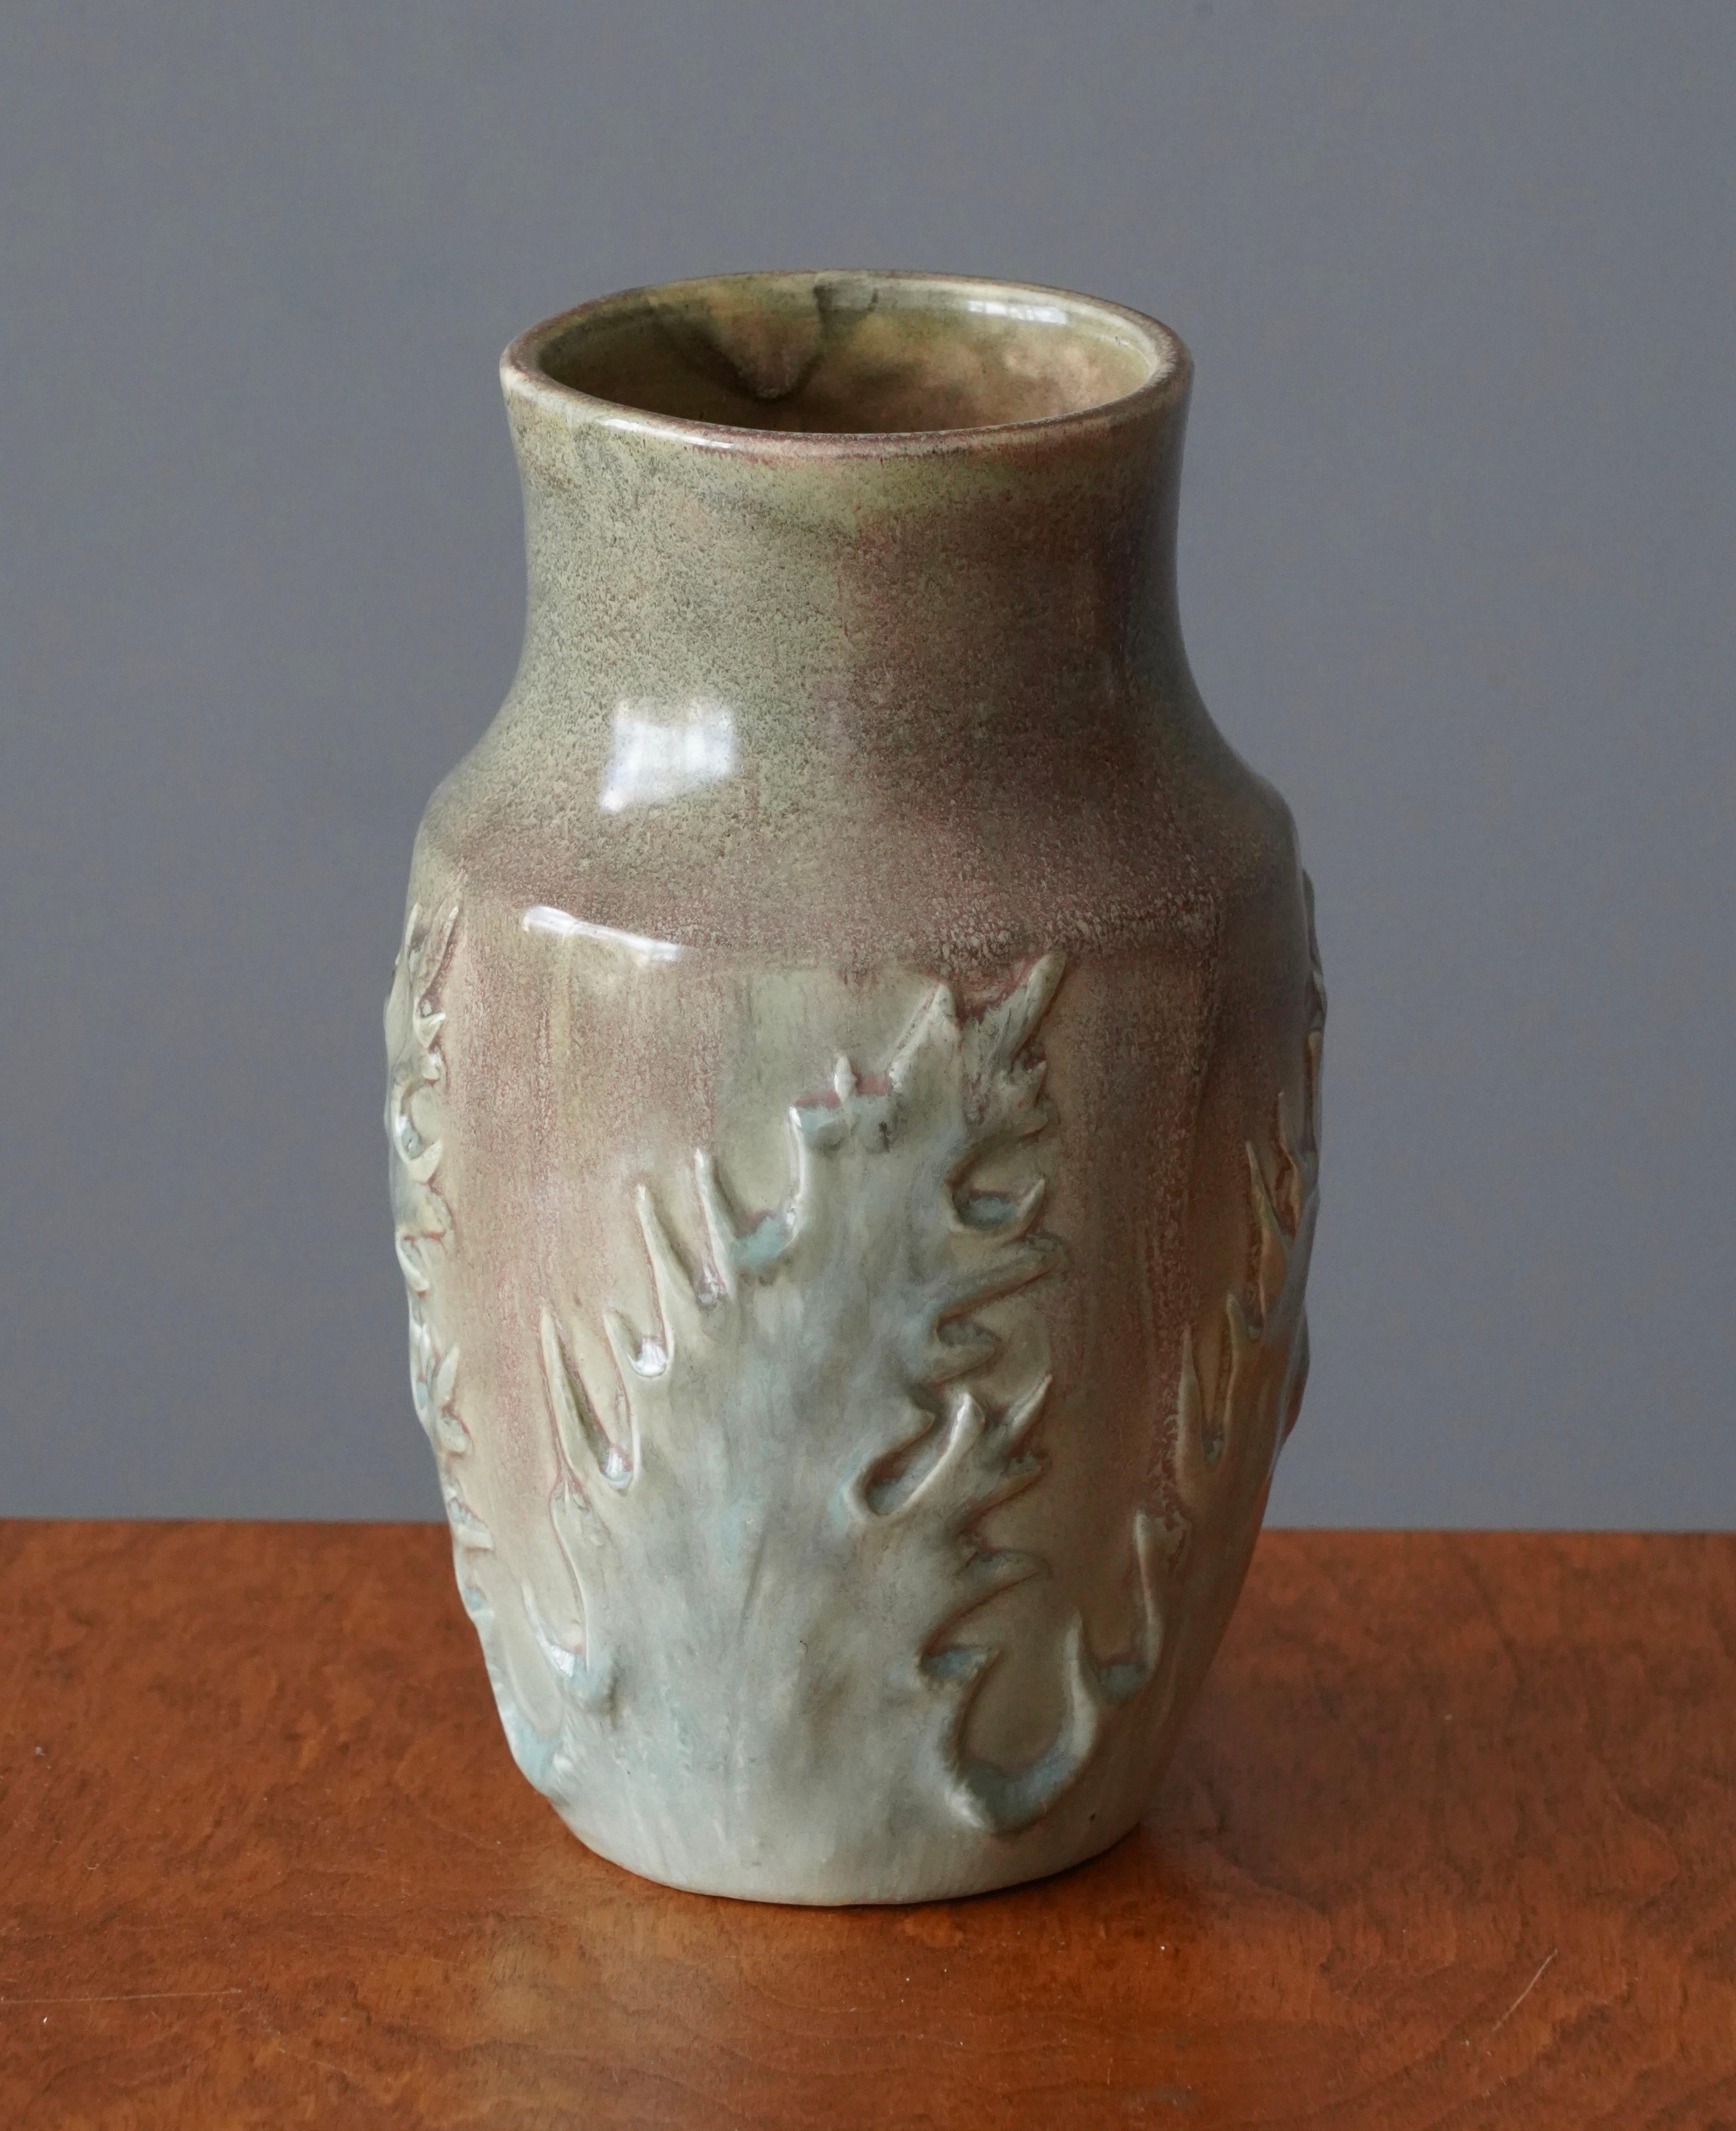 A vase, designed and produced by Höganäs Keramik, Sweden, 1920s. Features floral relief motifs. In green and blue tones.

In earthenware with highly artistic glaze in grey and beige.